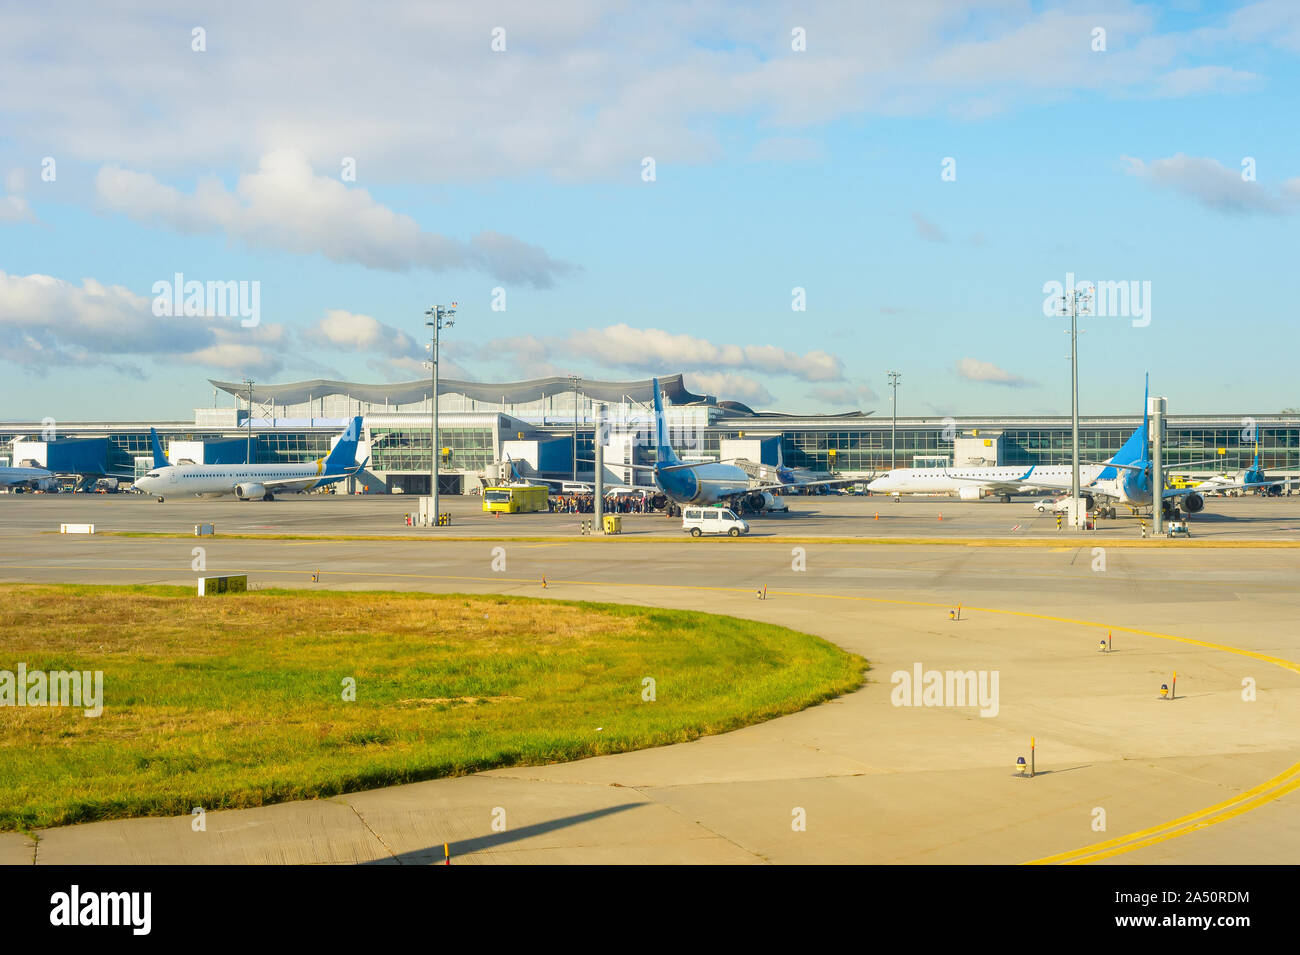 Airplanes, bus and passengers queue by the airport, Boryspil, Kyiv, Ukraine Stock Photo